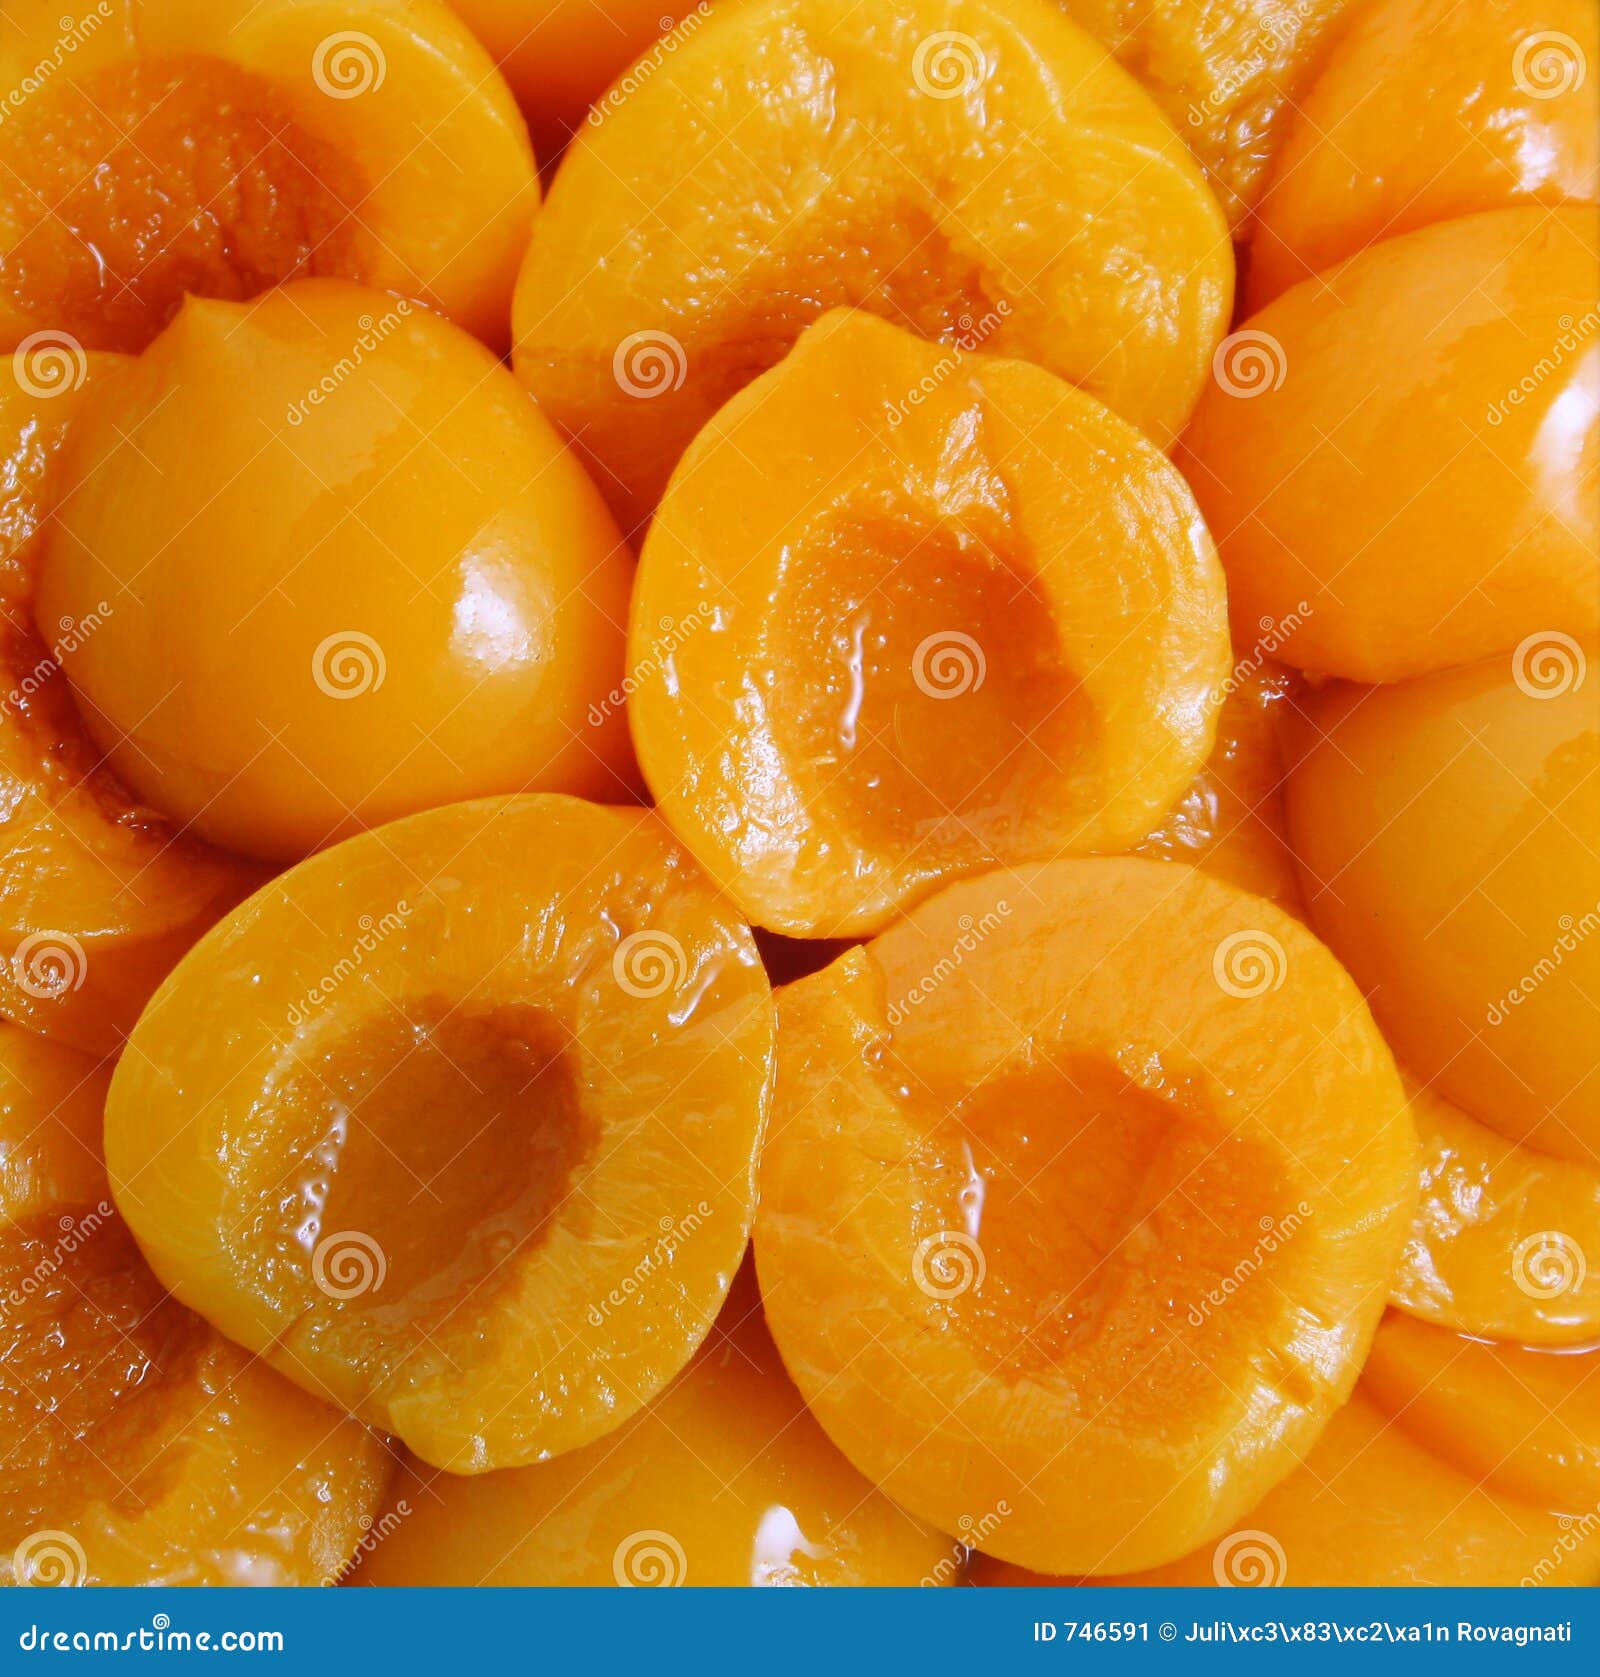 detail of a group of peaches